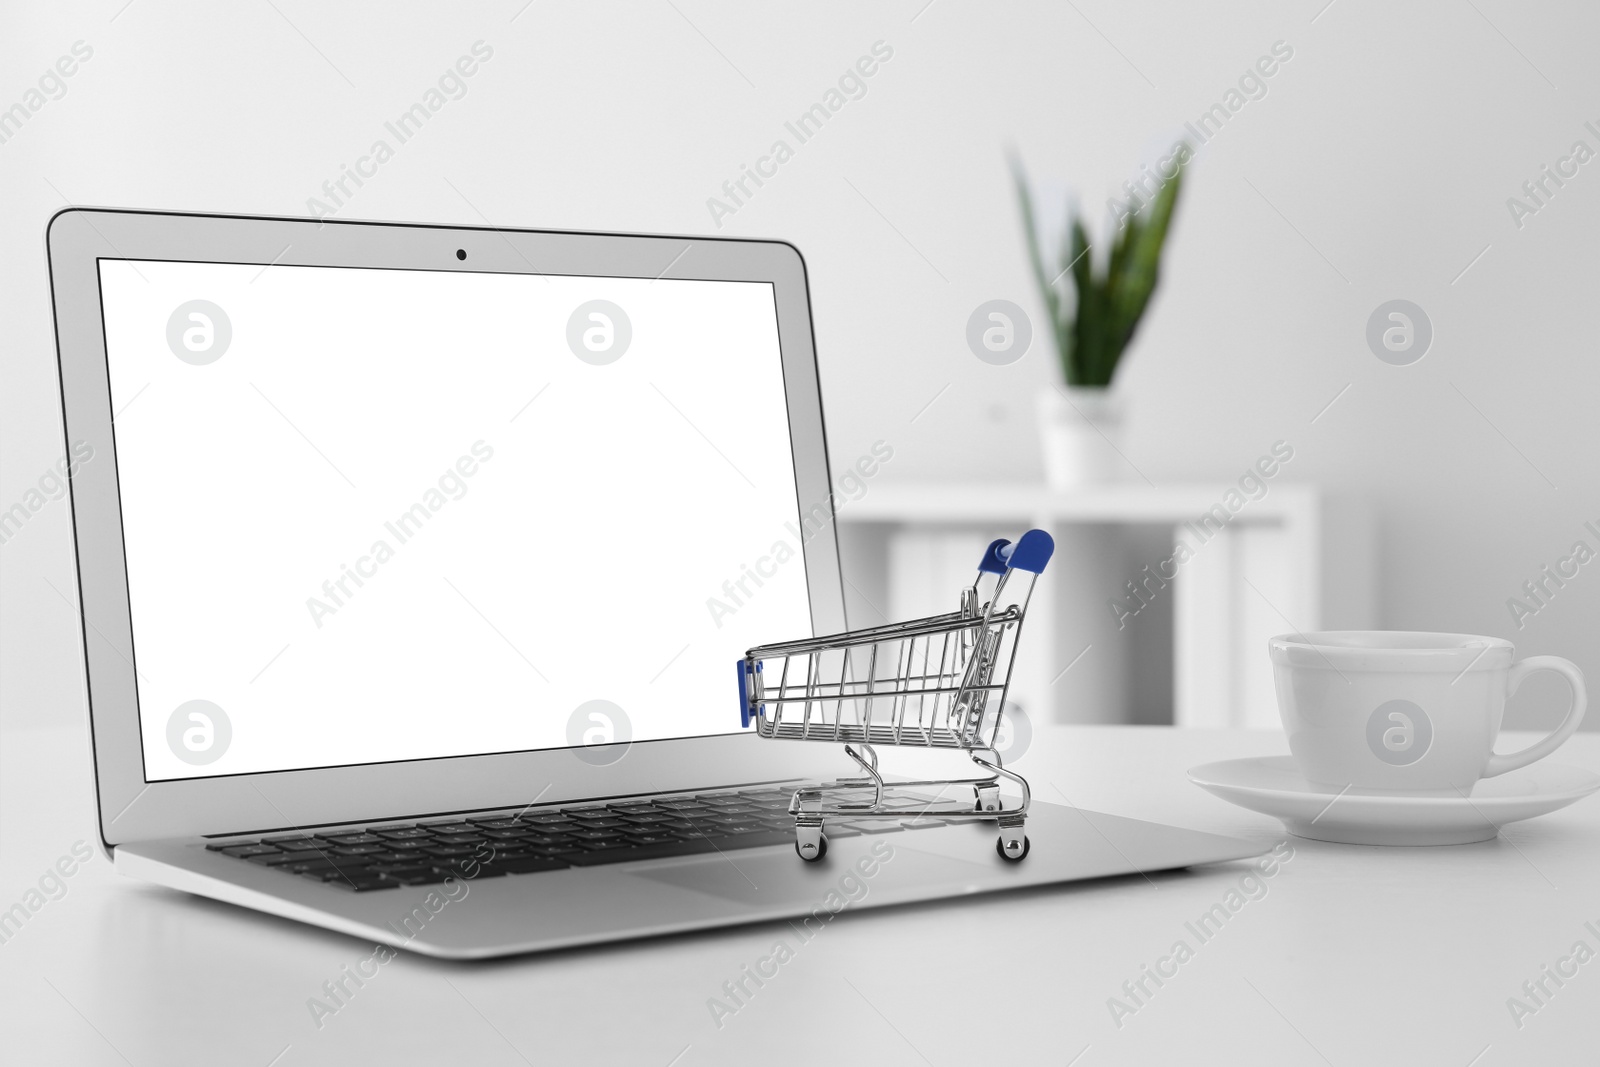 Image of Online shopping. Laptop with small cart and cup on table